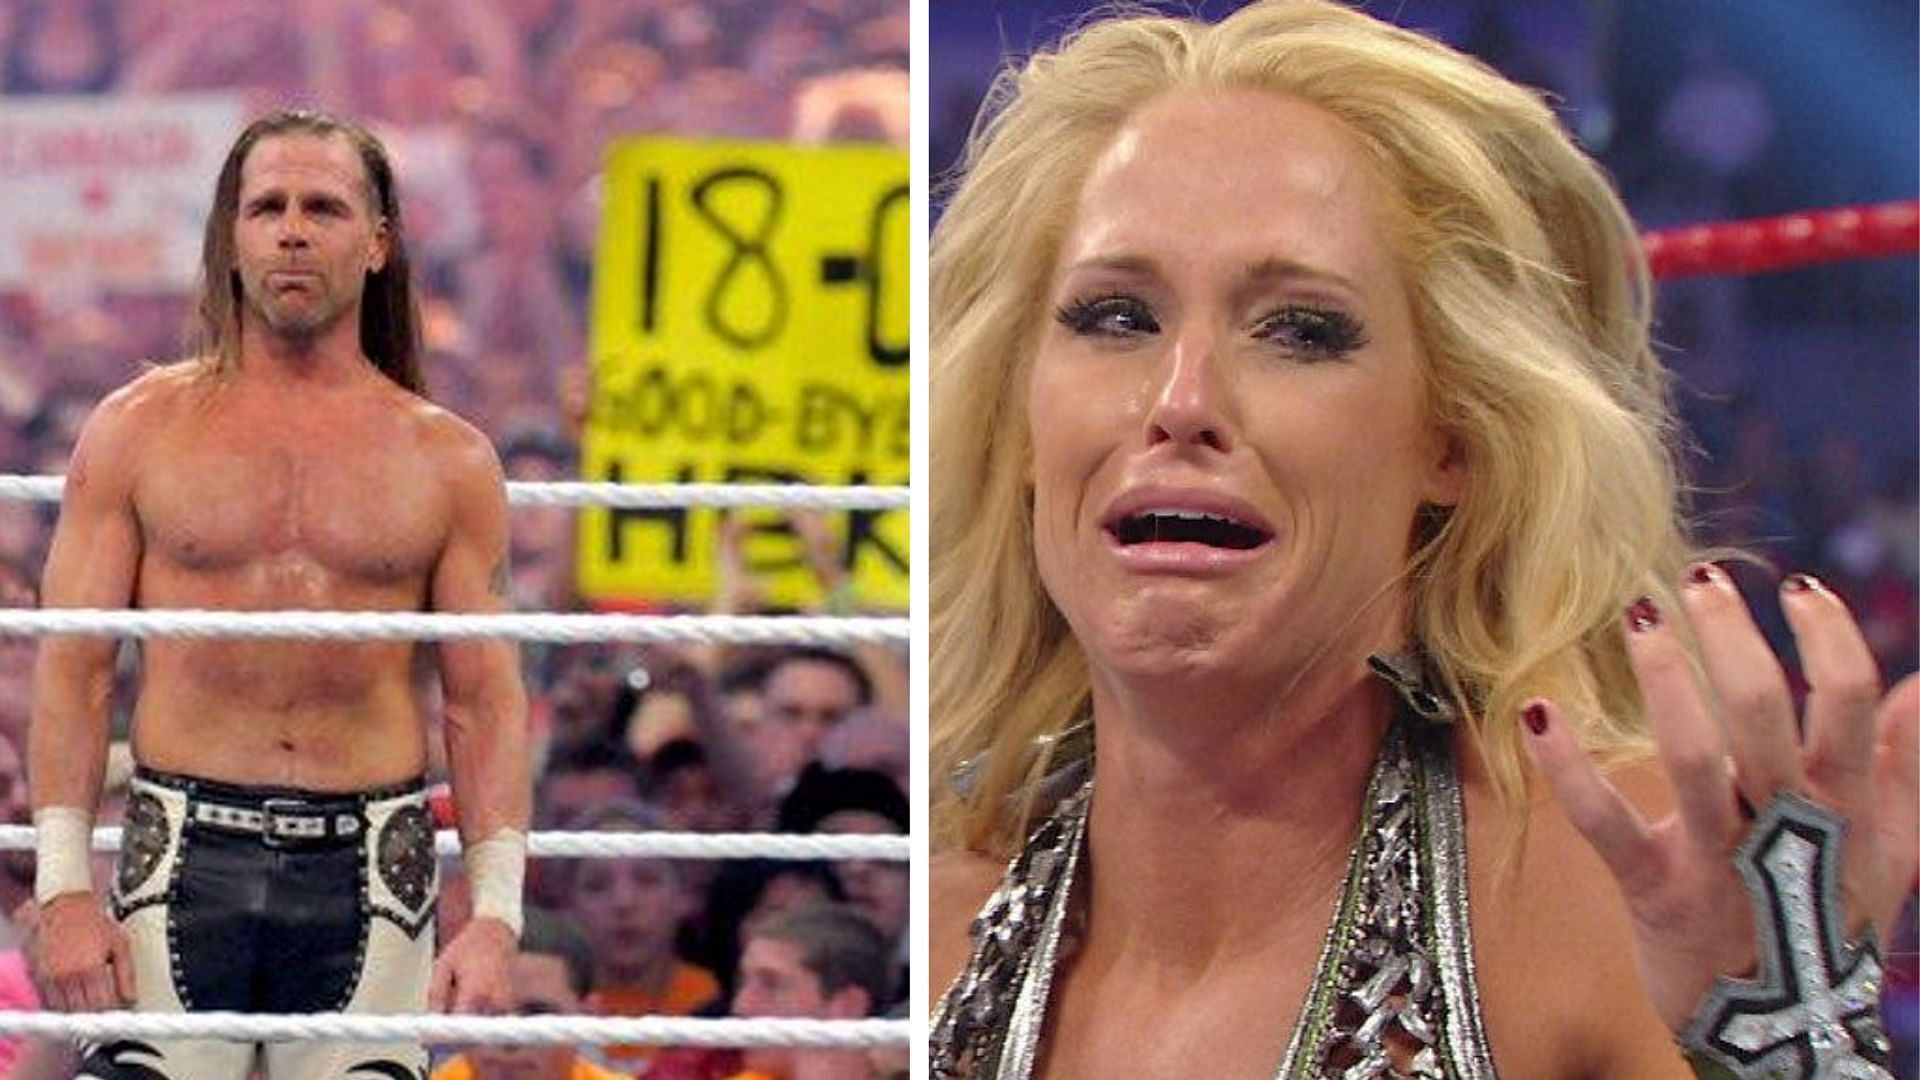 HBK retired at his peak following arguably the greatest main event in WrestleMania history.